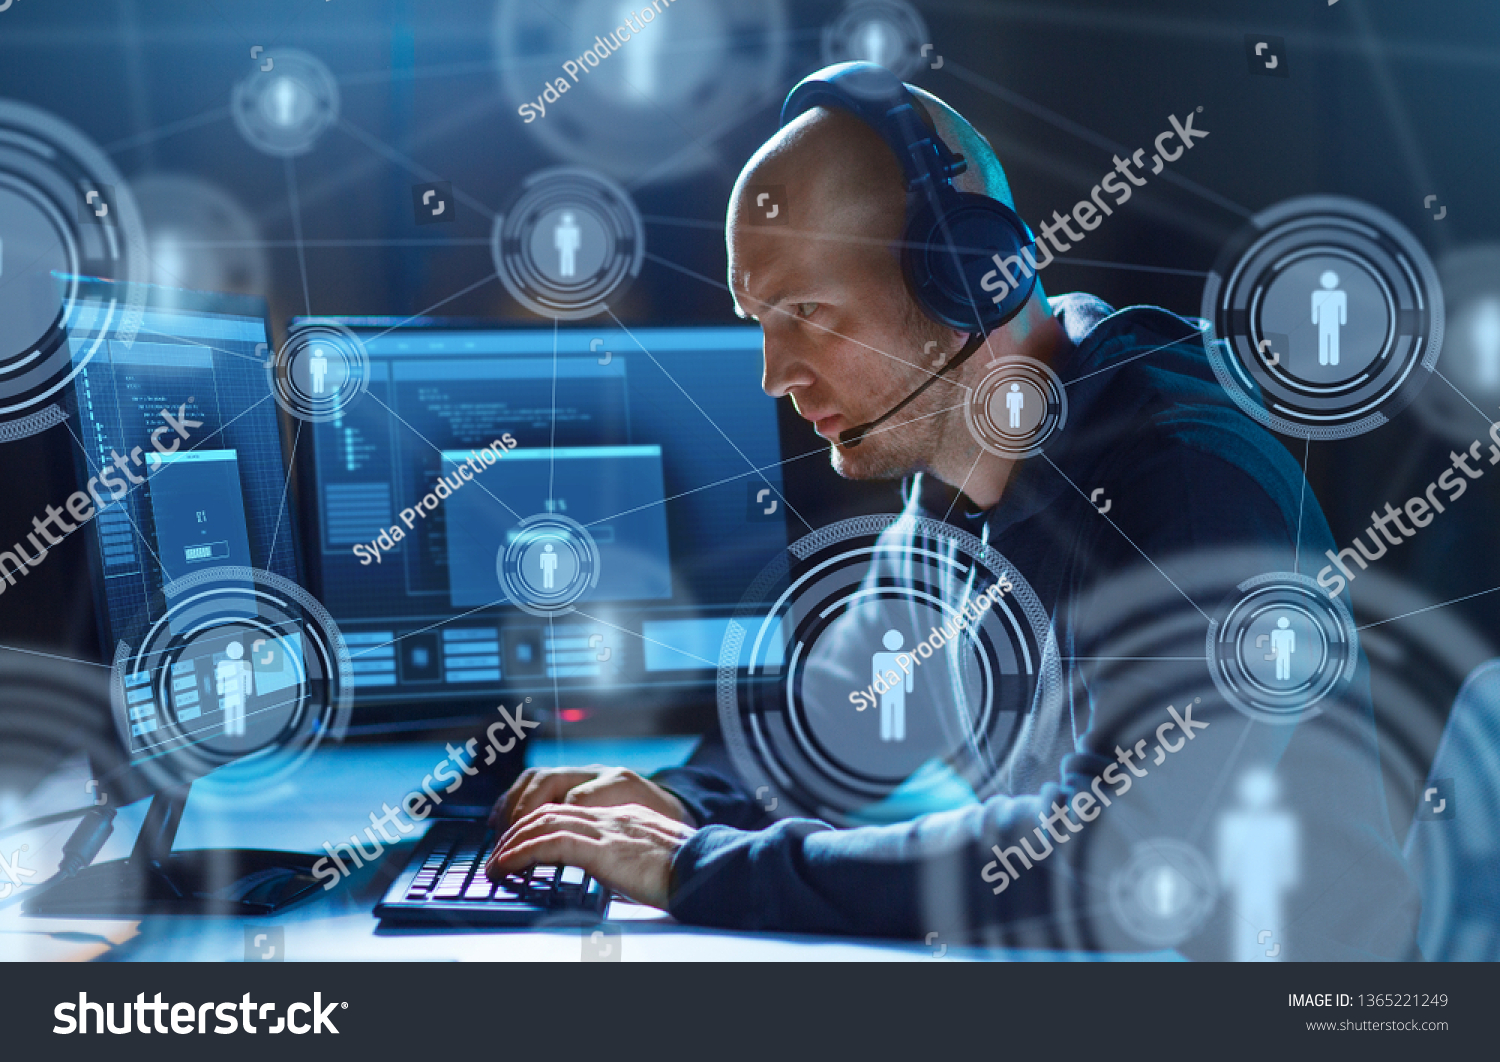 cybercrime, hacking and technology concept - male hacker in headset with progress loading bar on computer screen wiretapping or using virus program for cyber attack in dark room #1365221249